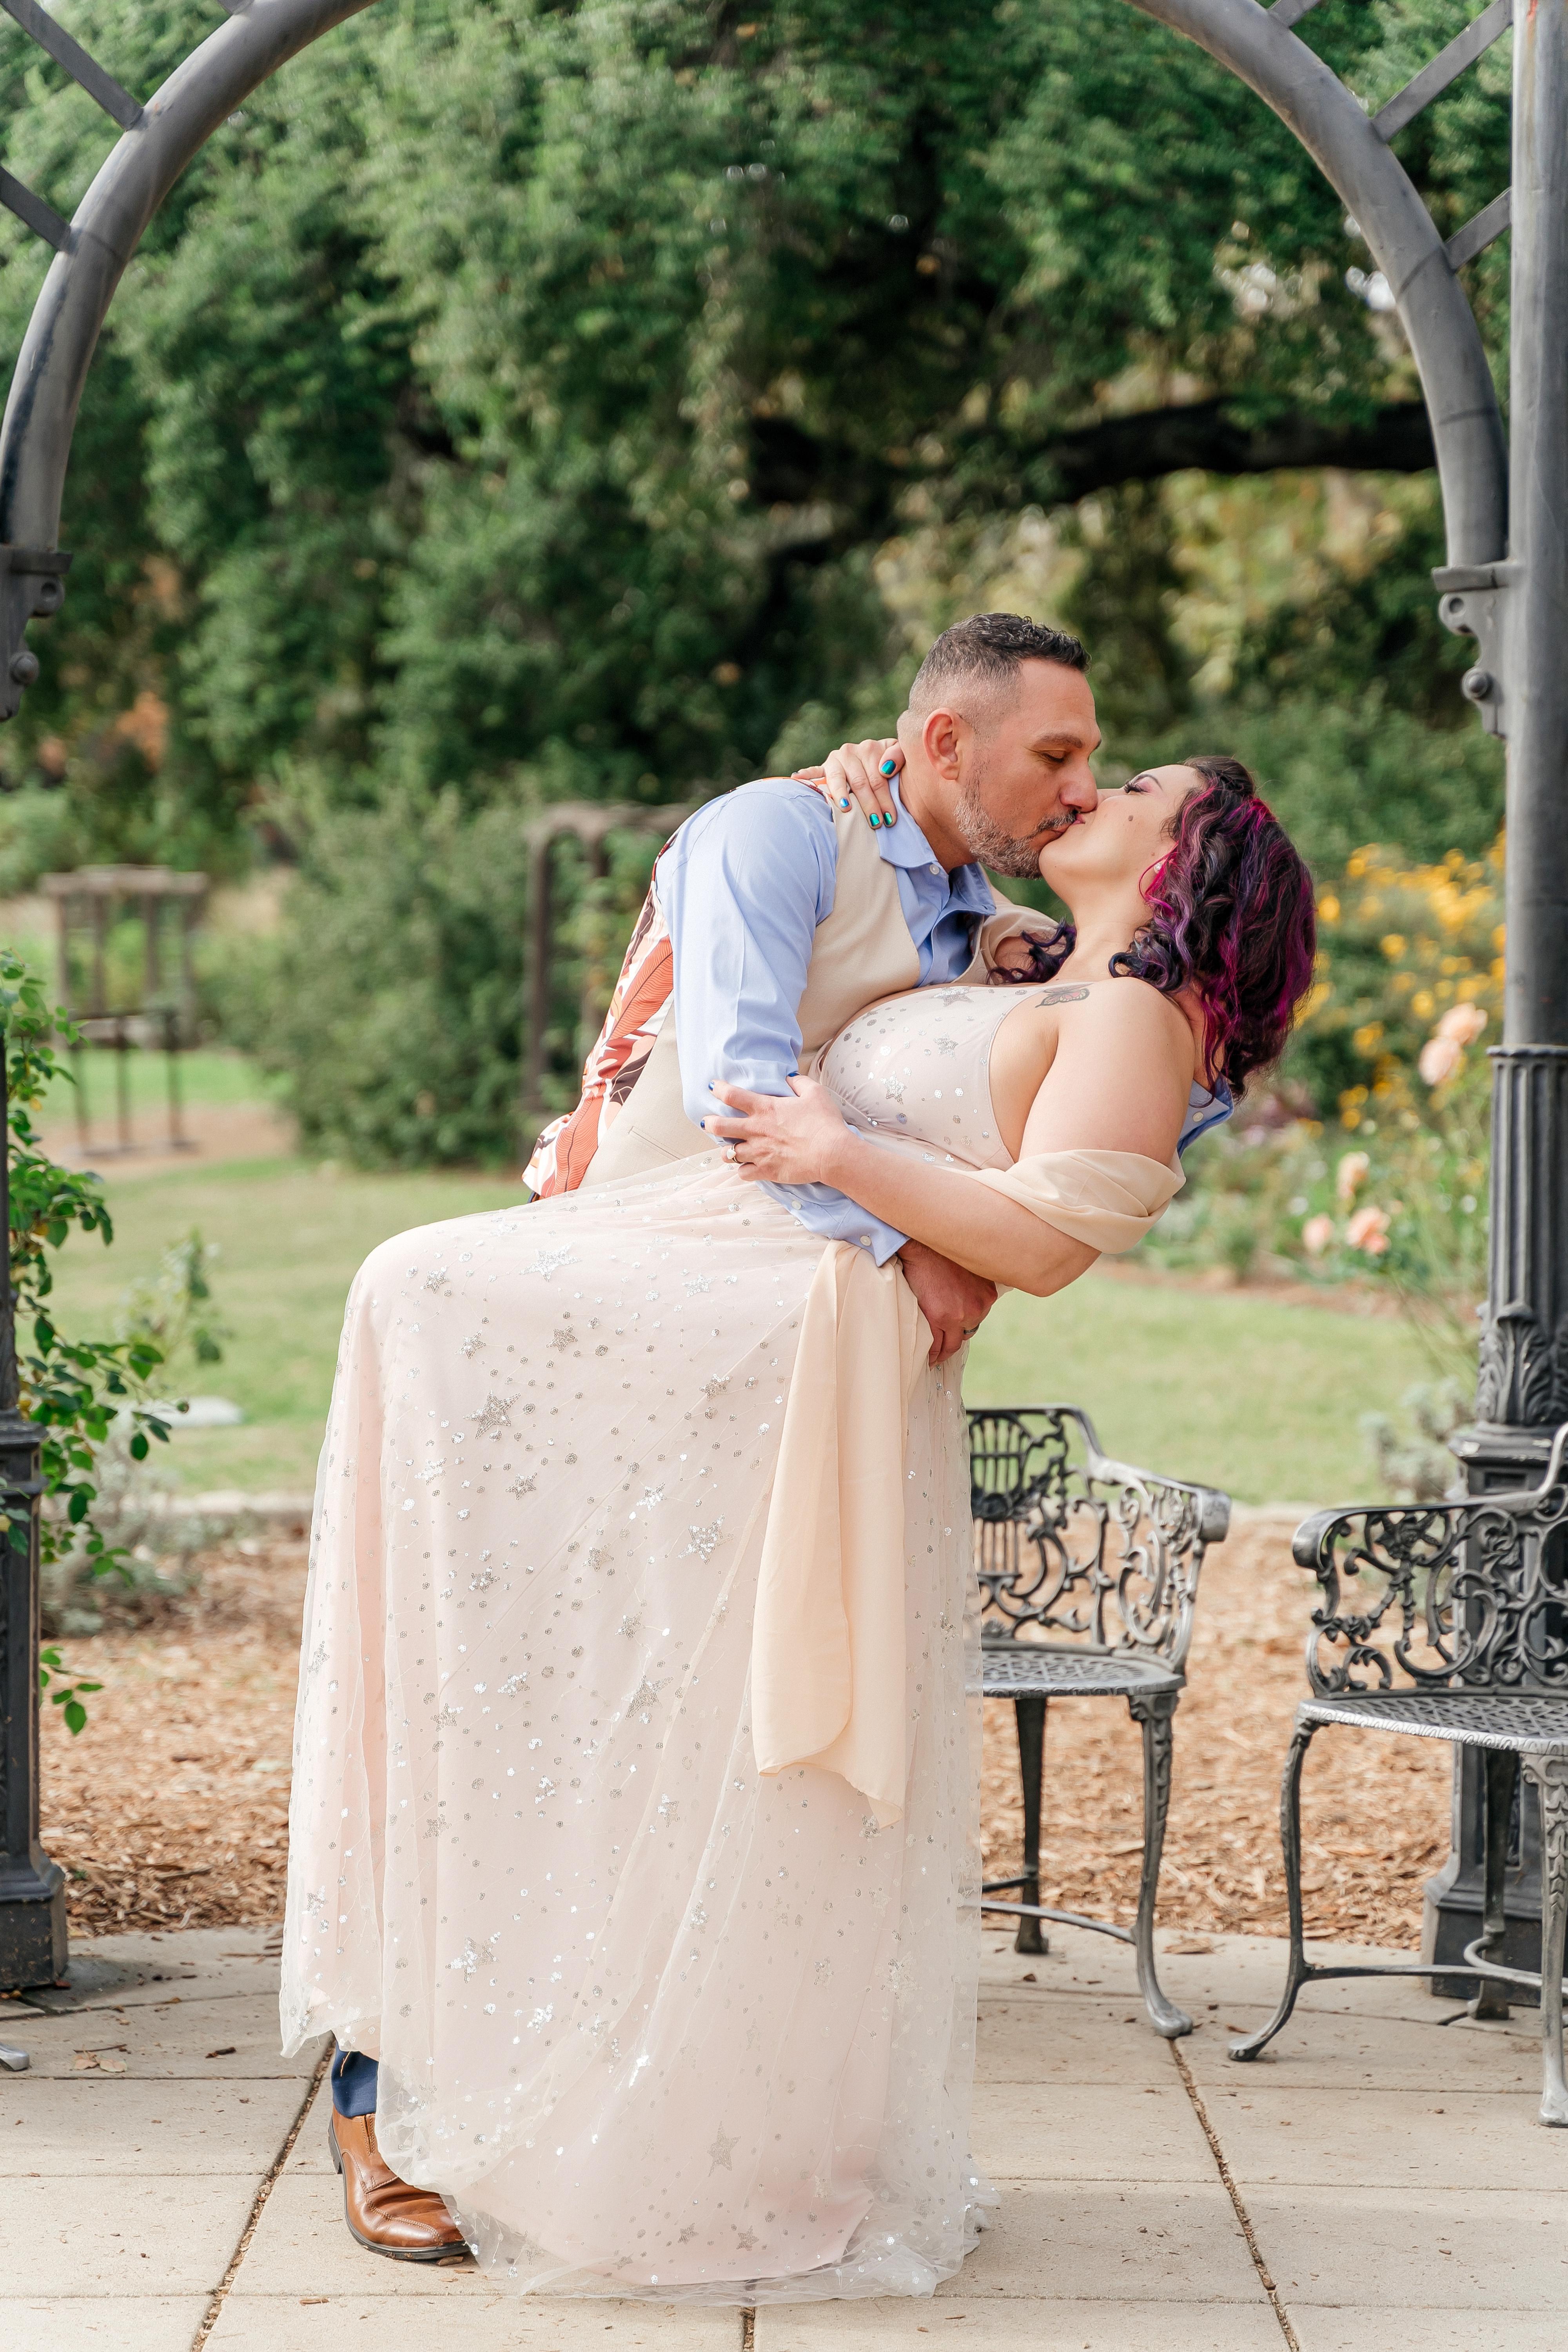 The Wedding Website of Jacquelyn Fanno and Manny Kourkelian